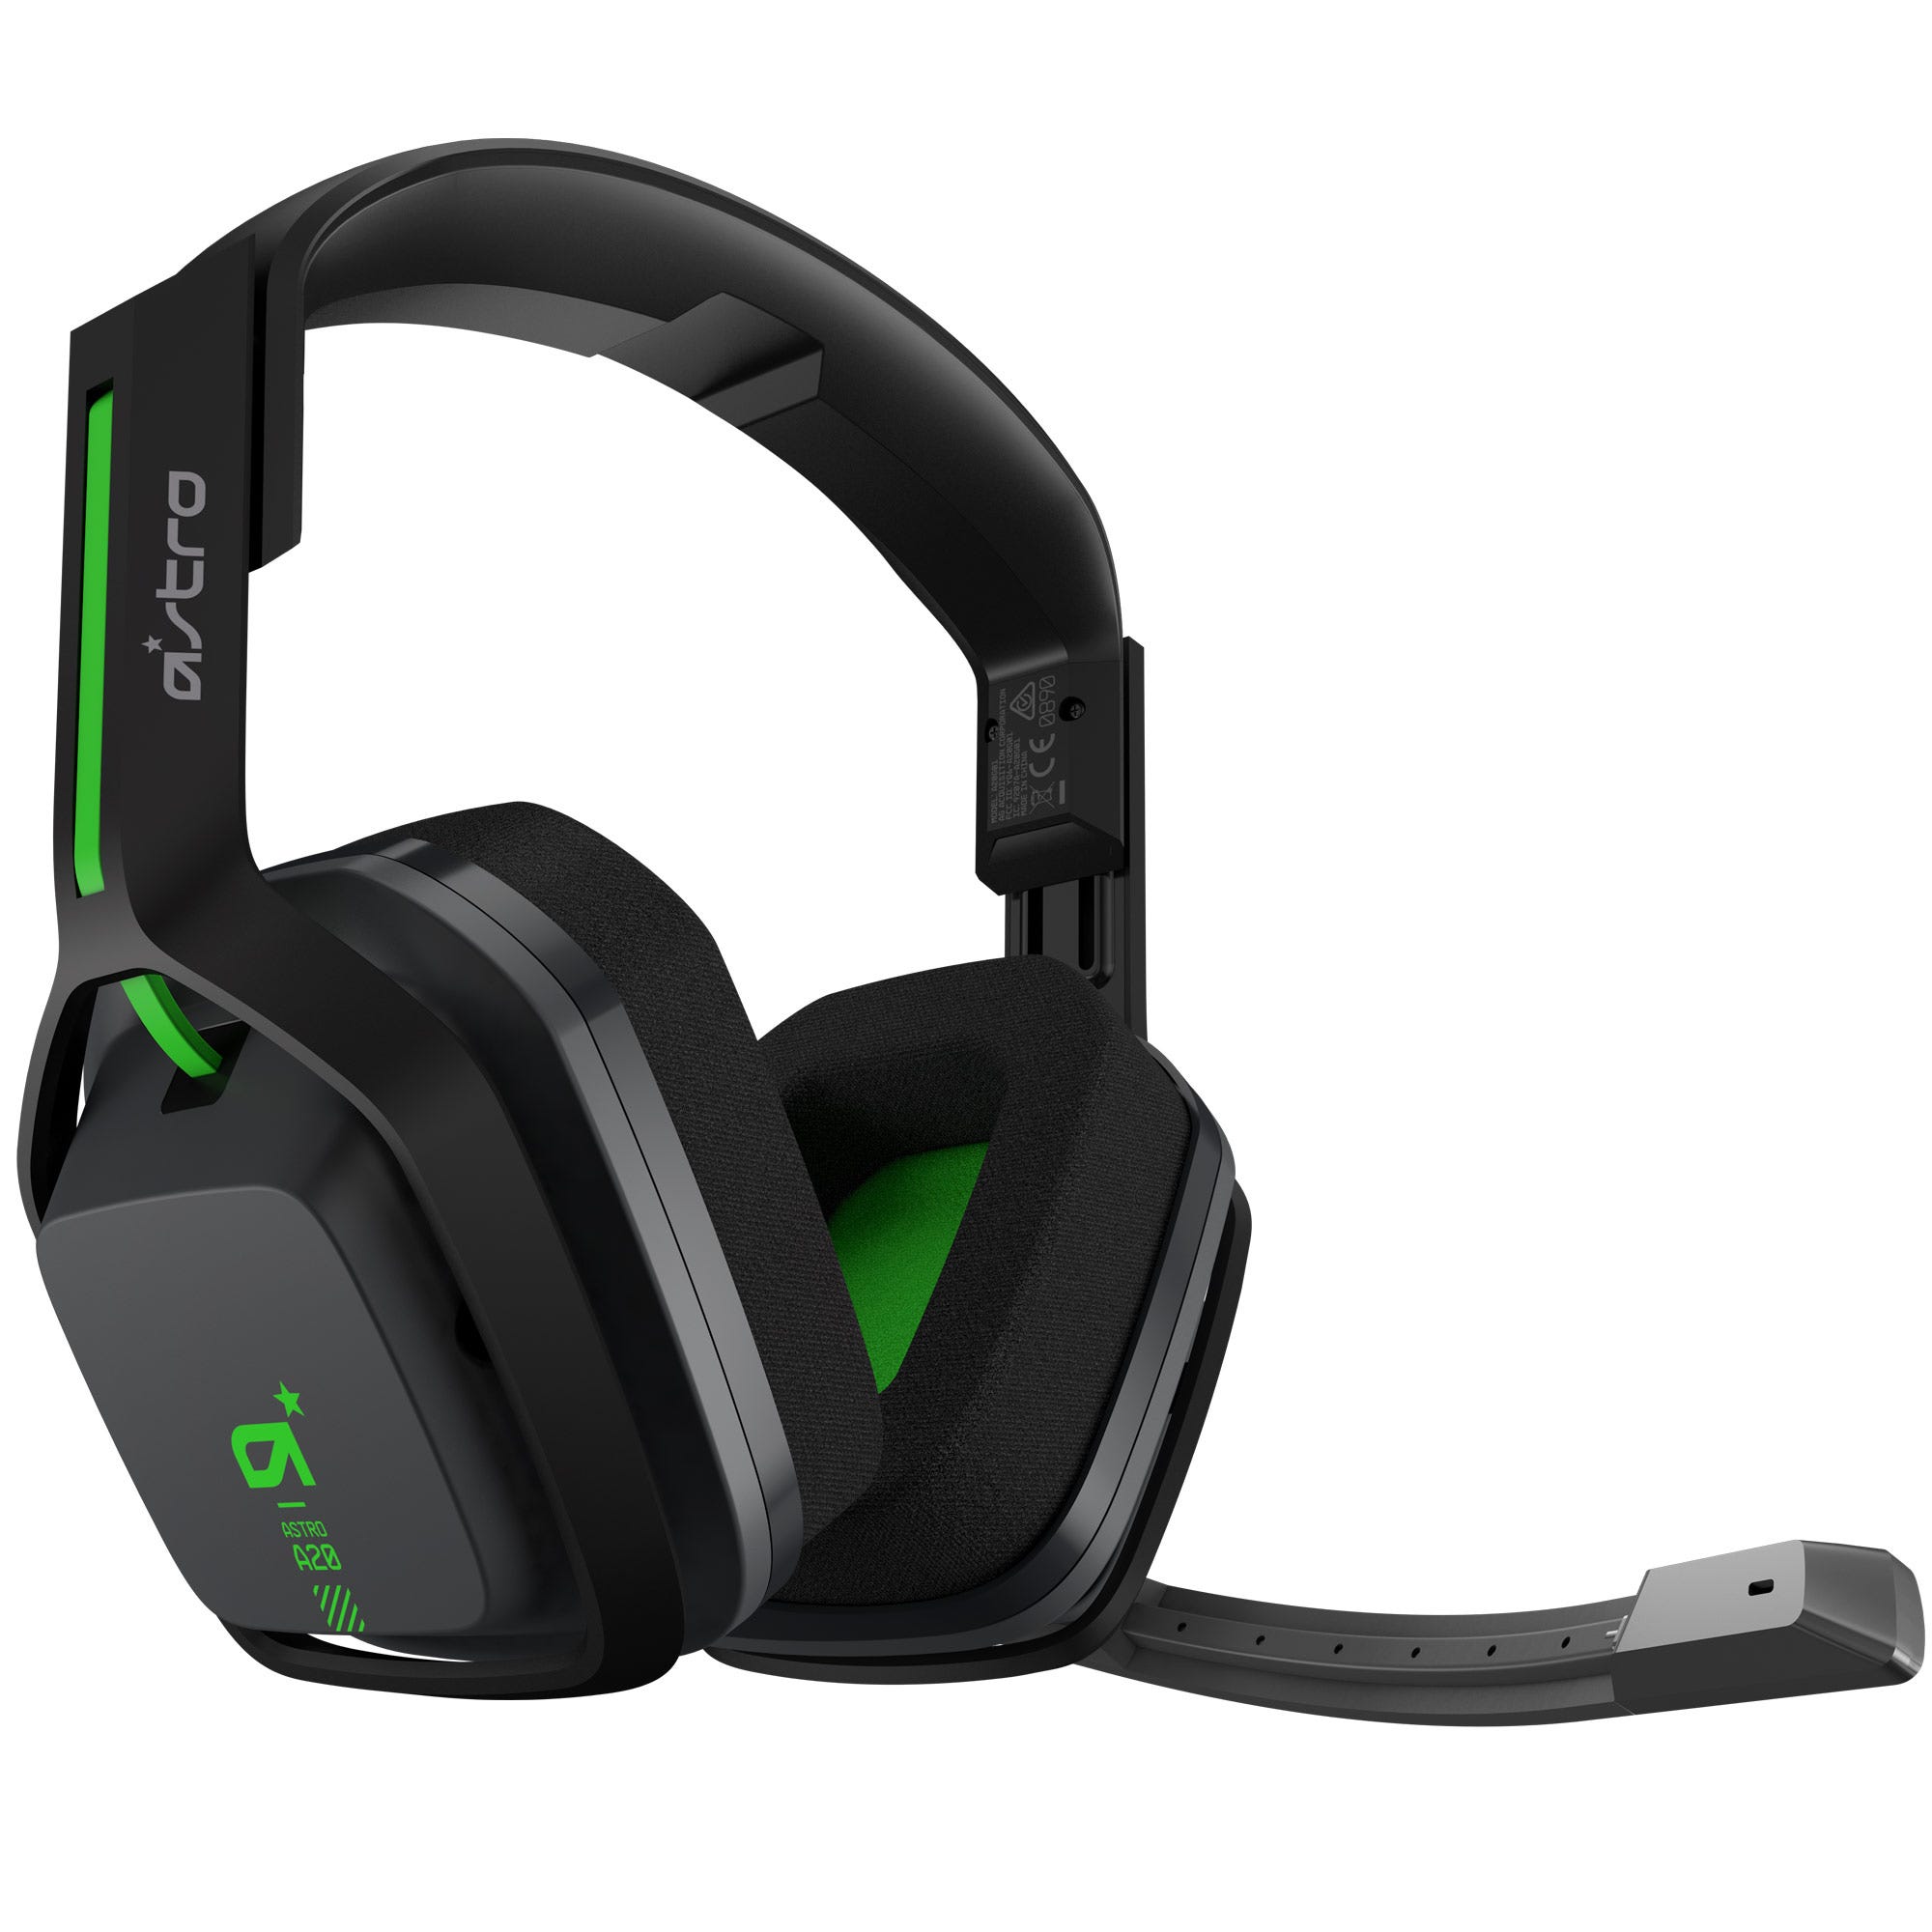 Astro A20 Wireless Headset Review, by Alex Rowe